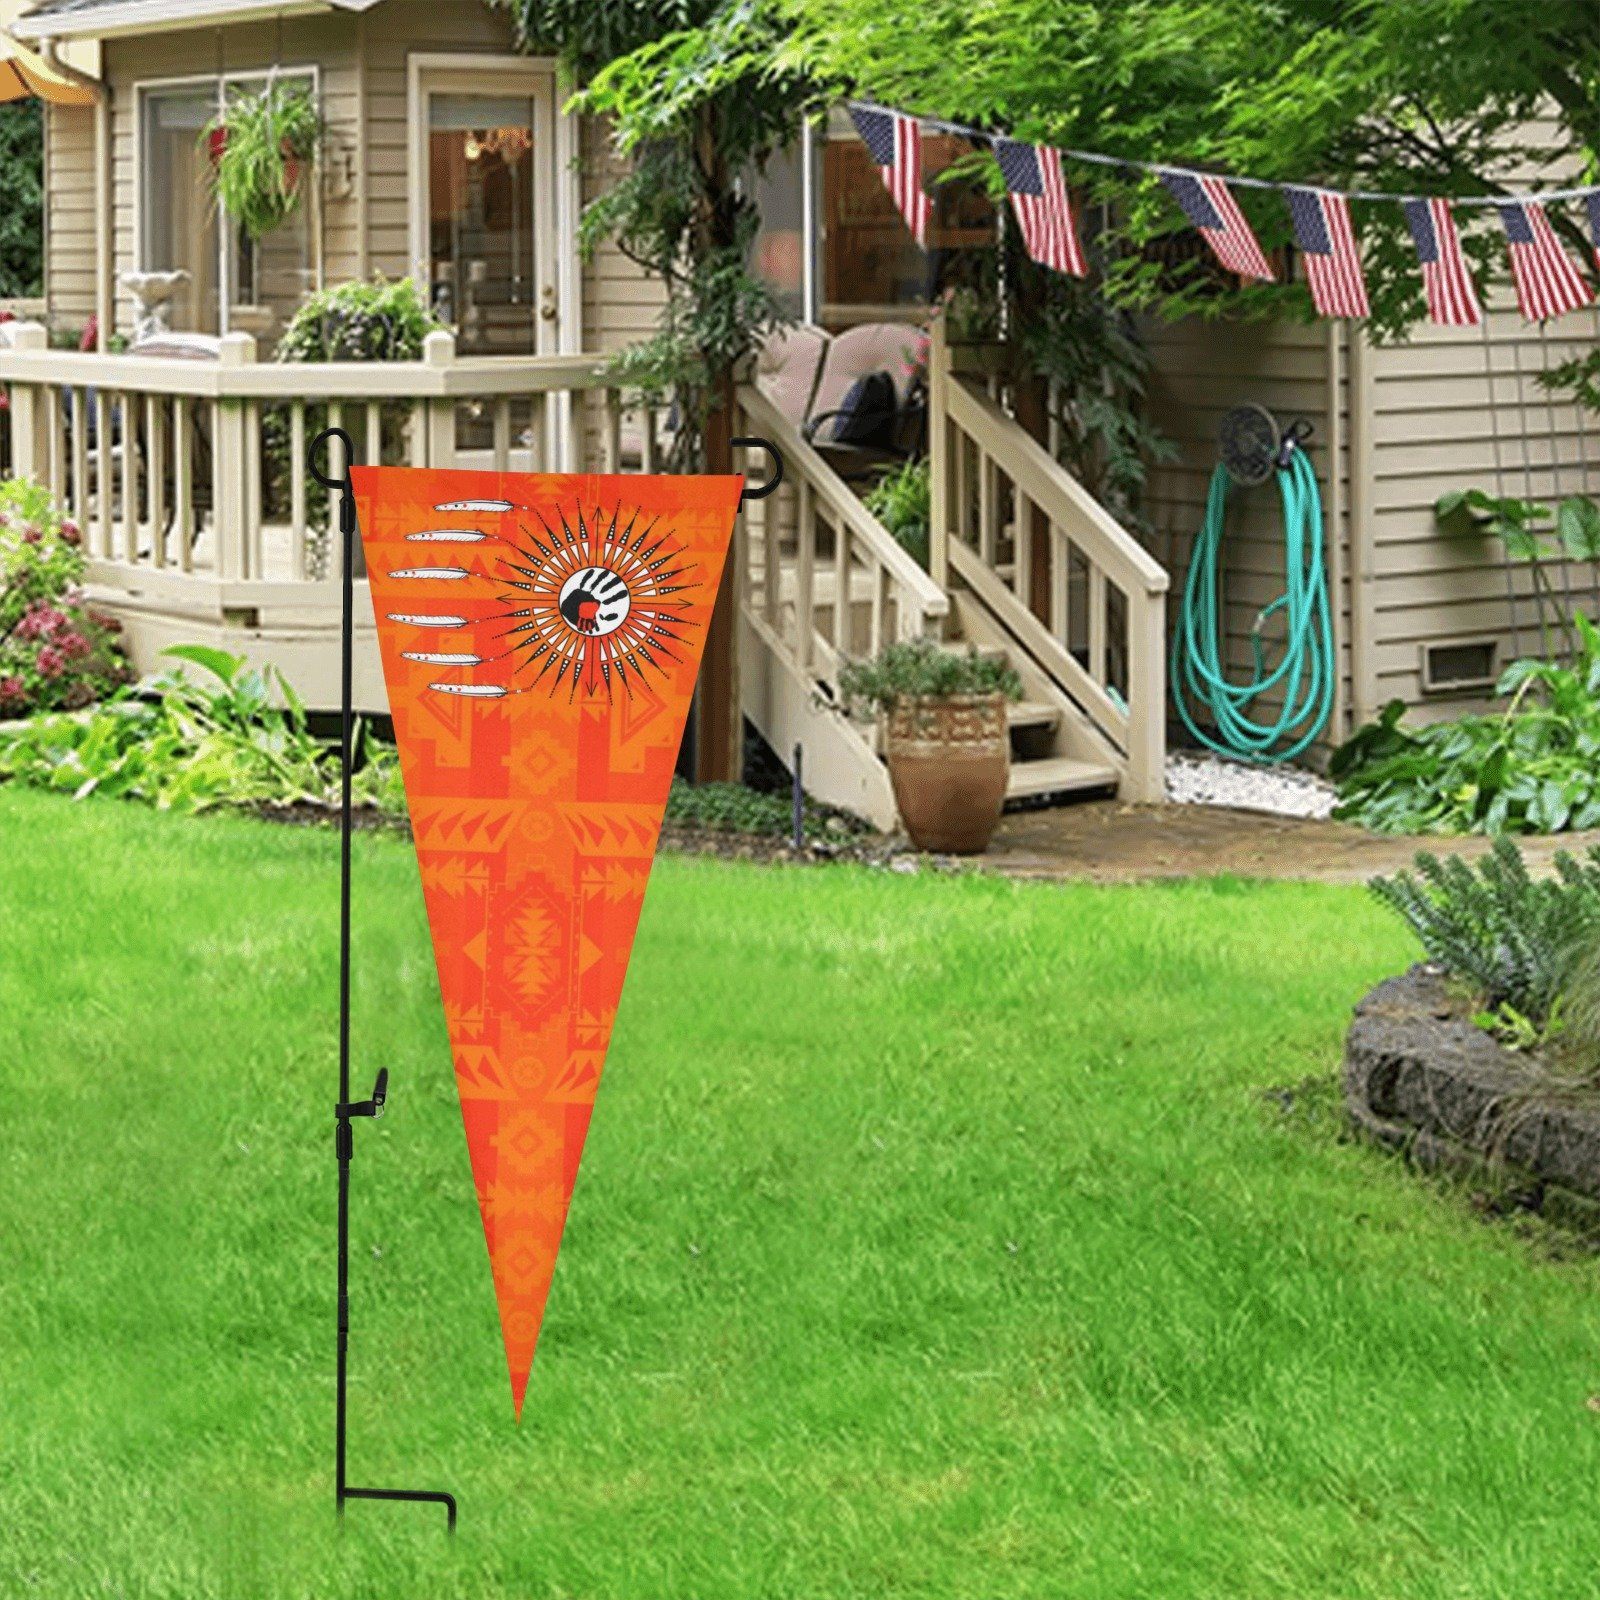 Chiefs Mountain Orange Feather Directions Trigonal Garden Flag 30"x12" Trigonal Garden Flag 30"x12" e-joyer 